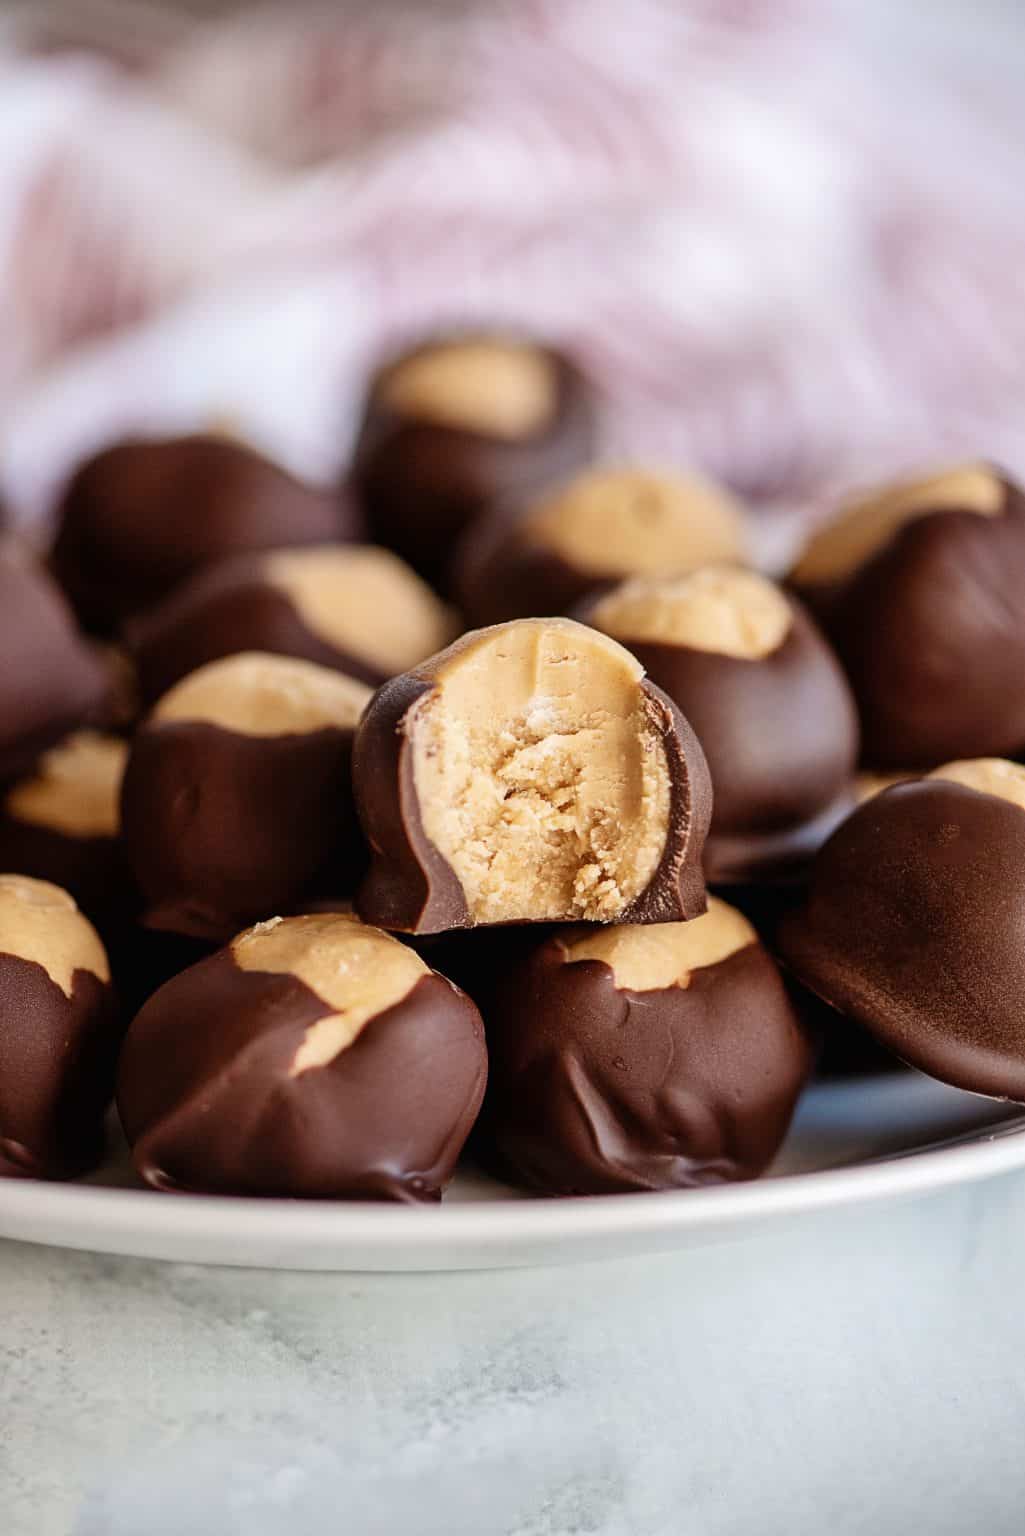 Chocolate Peanut Butter Balls (No Baking Necessary) - Southern Plate